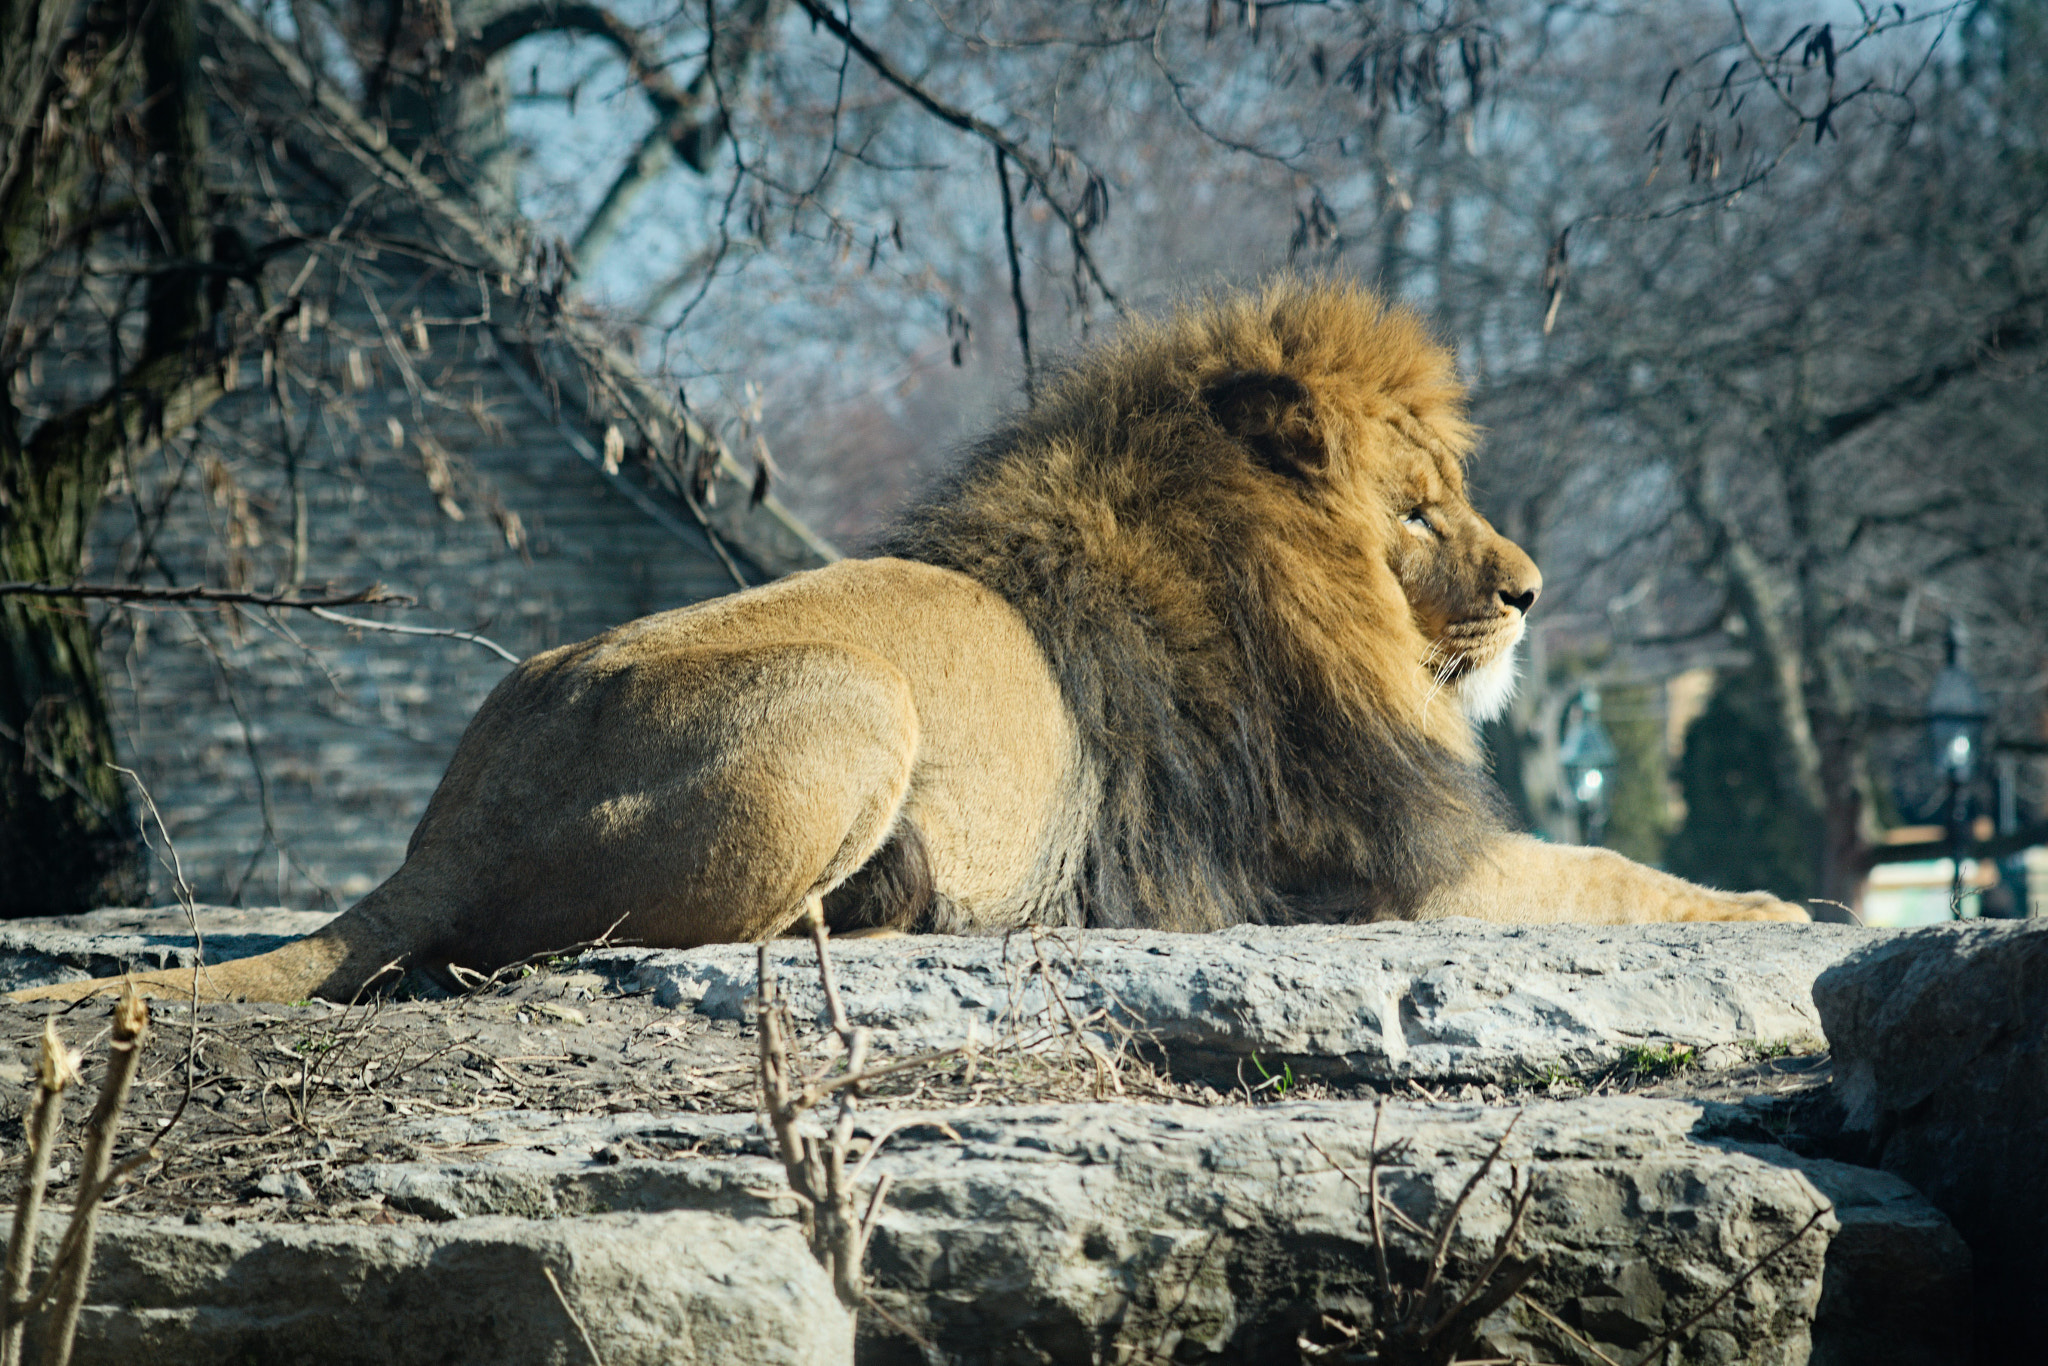 AF Zoom-Nikkor 35-135mm f/3.5-4.5 N sample photo. The king of the zoo photography